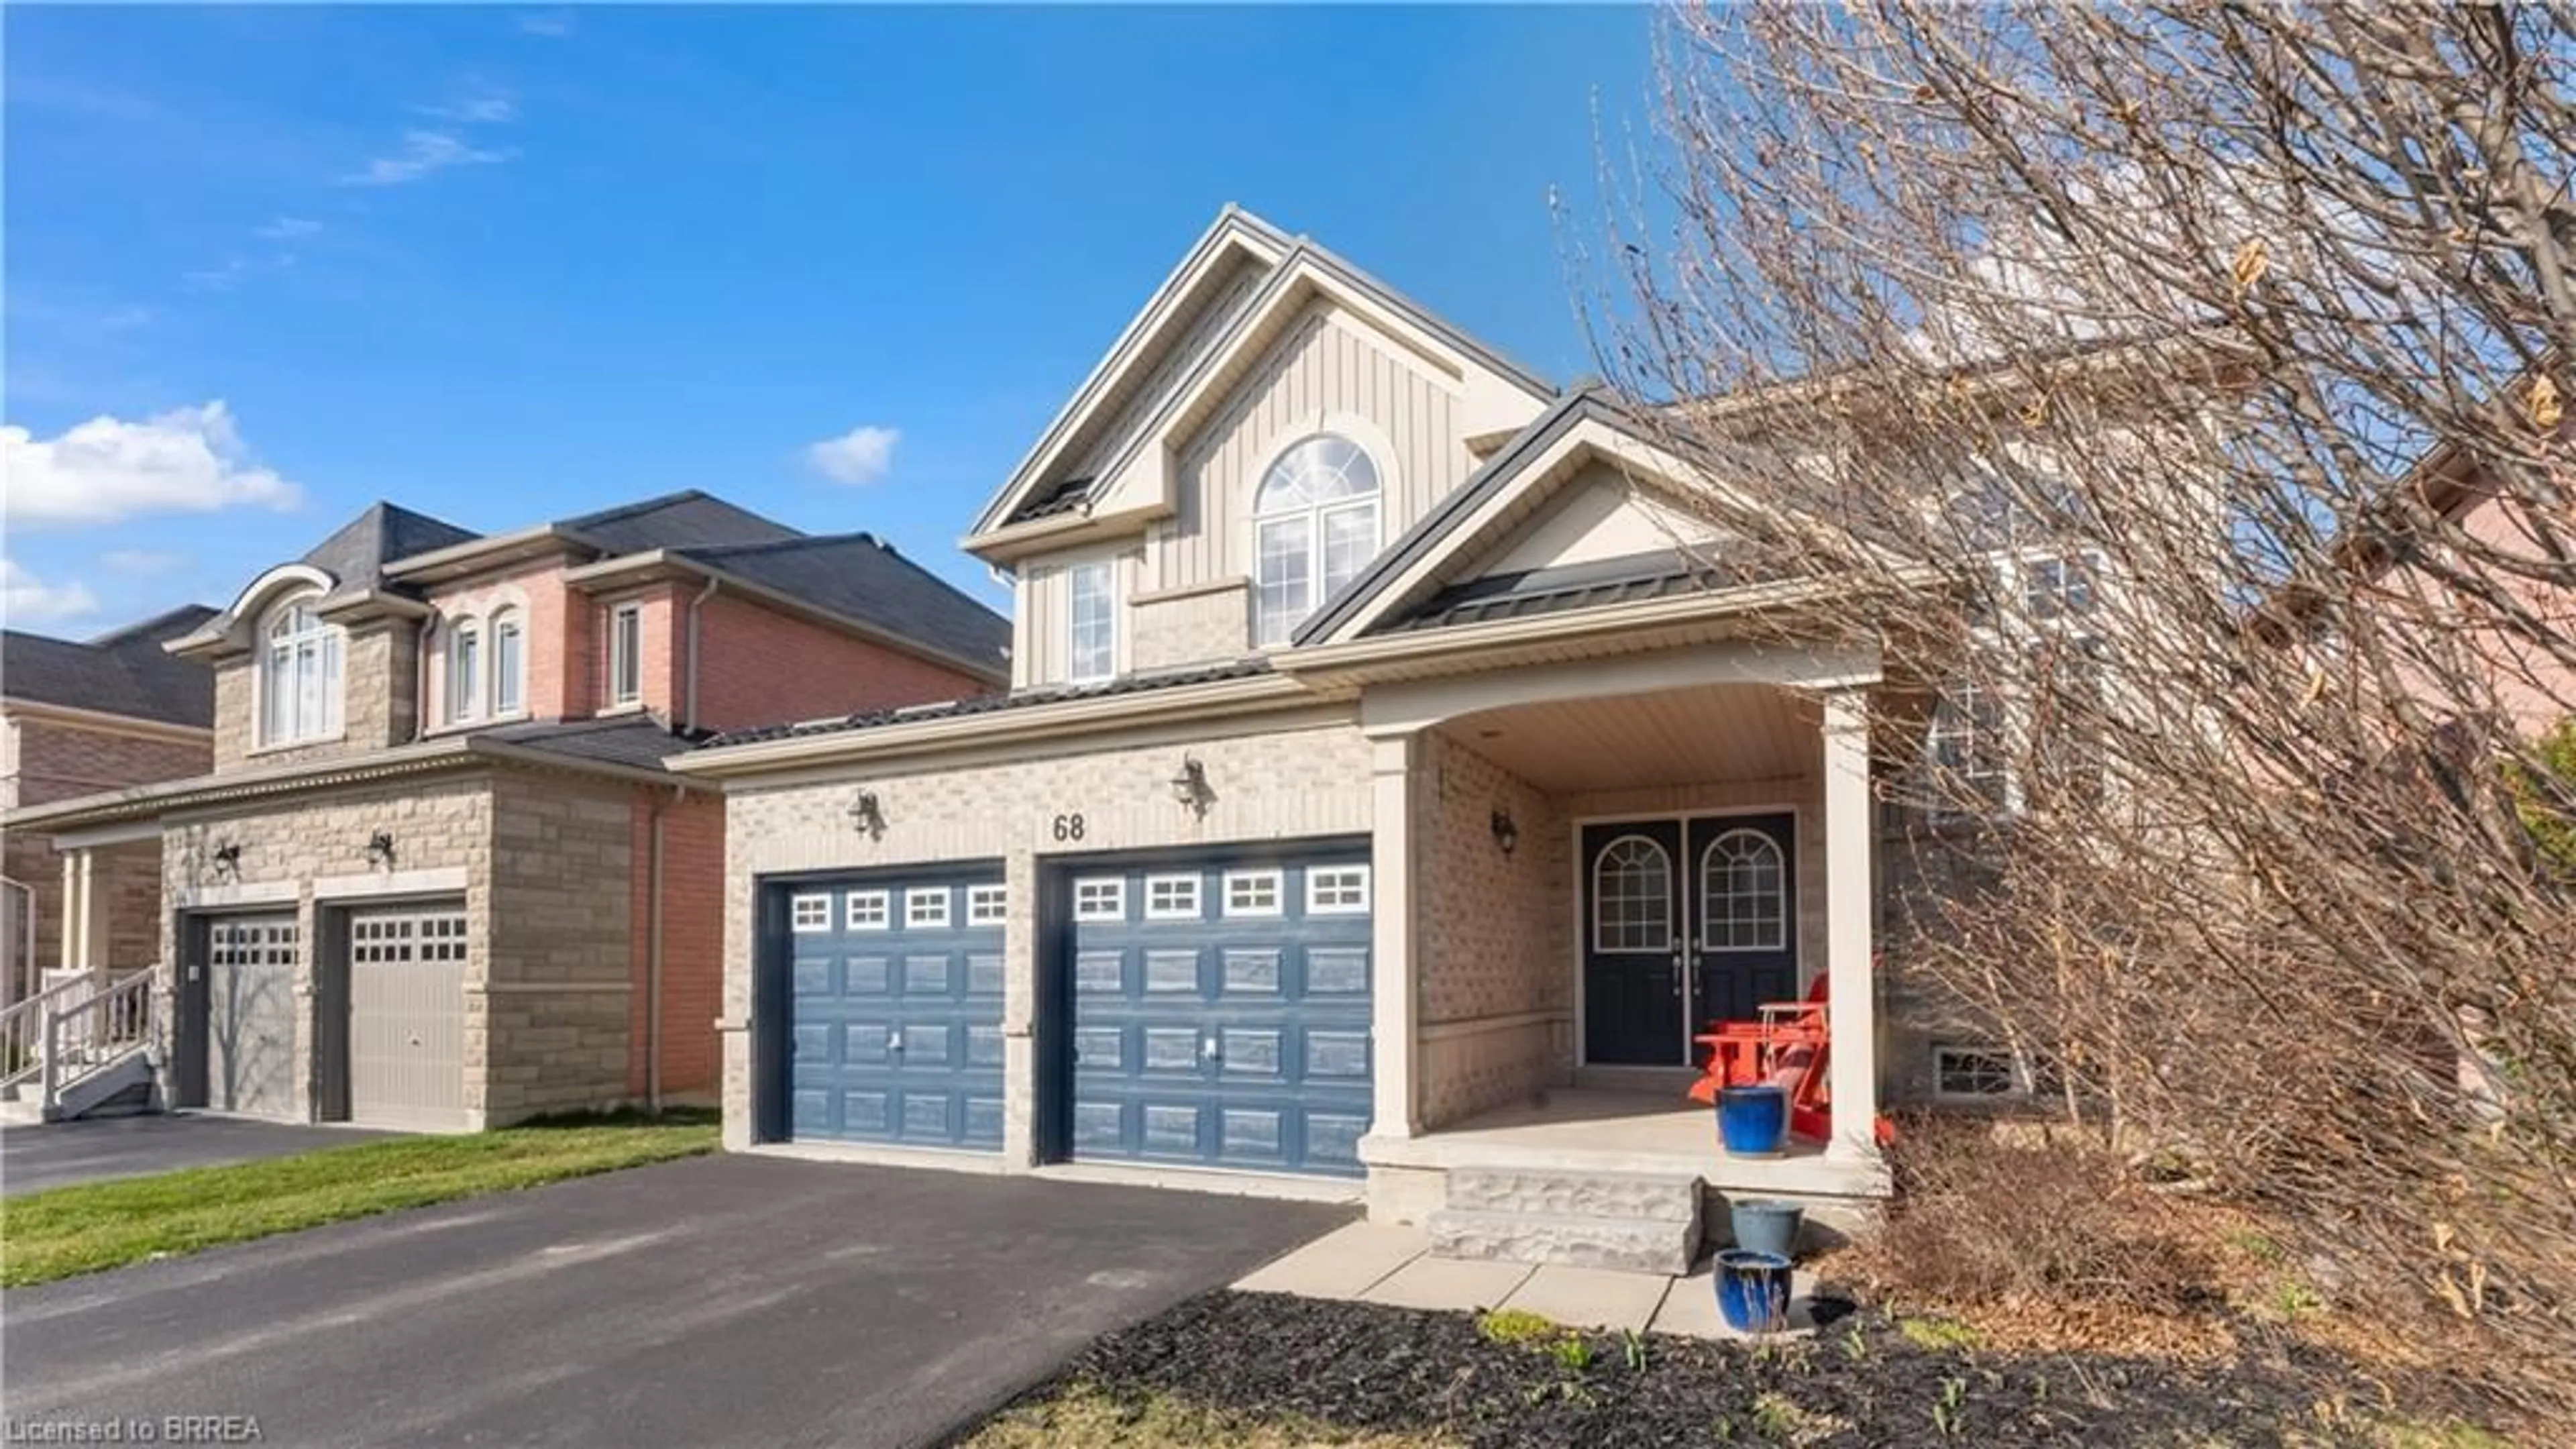 Home with brick exterior material for 68 Hansford Dr, Brantford Ontario N3S 0B3